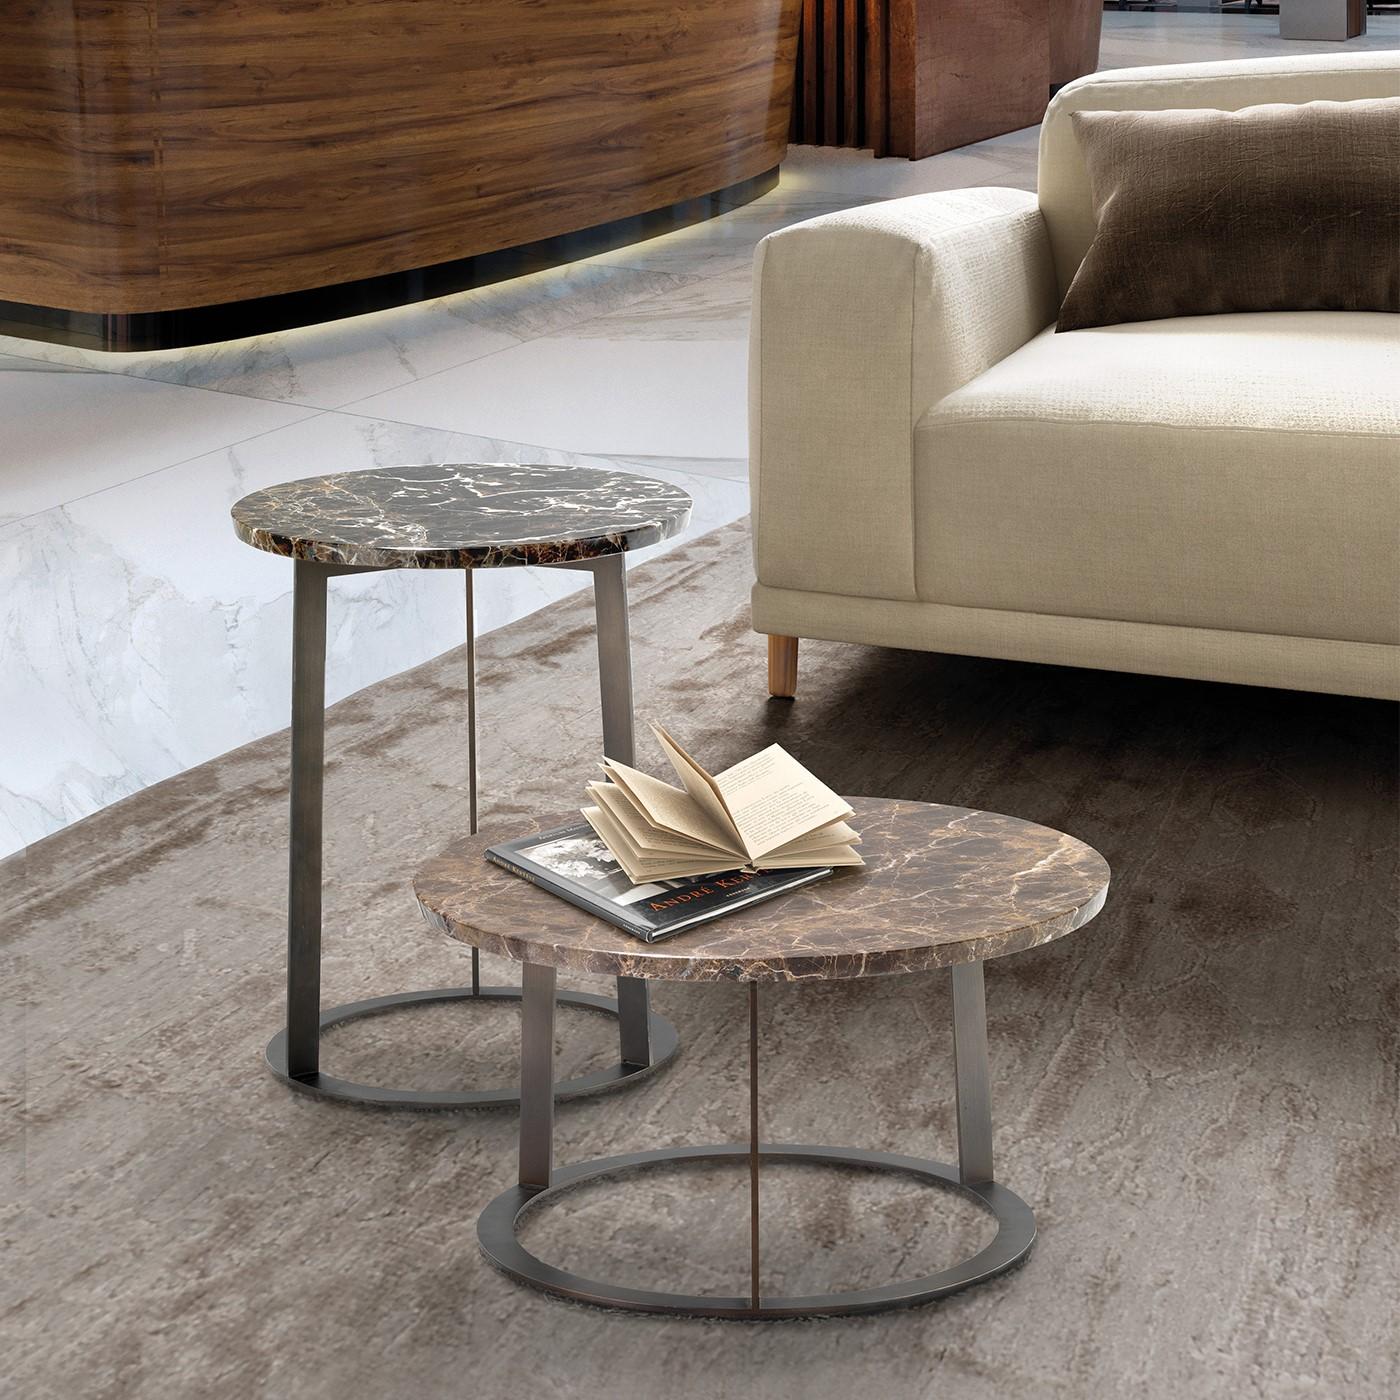 A sleek and elegant design, the Liberty Side Table will imbue timeless sophistication to any décor. Exuding a refined contemporary flair, it is comprised of a lacquered metal frame and features a stunning marble seat. Best purchased in pairs or